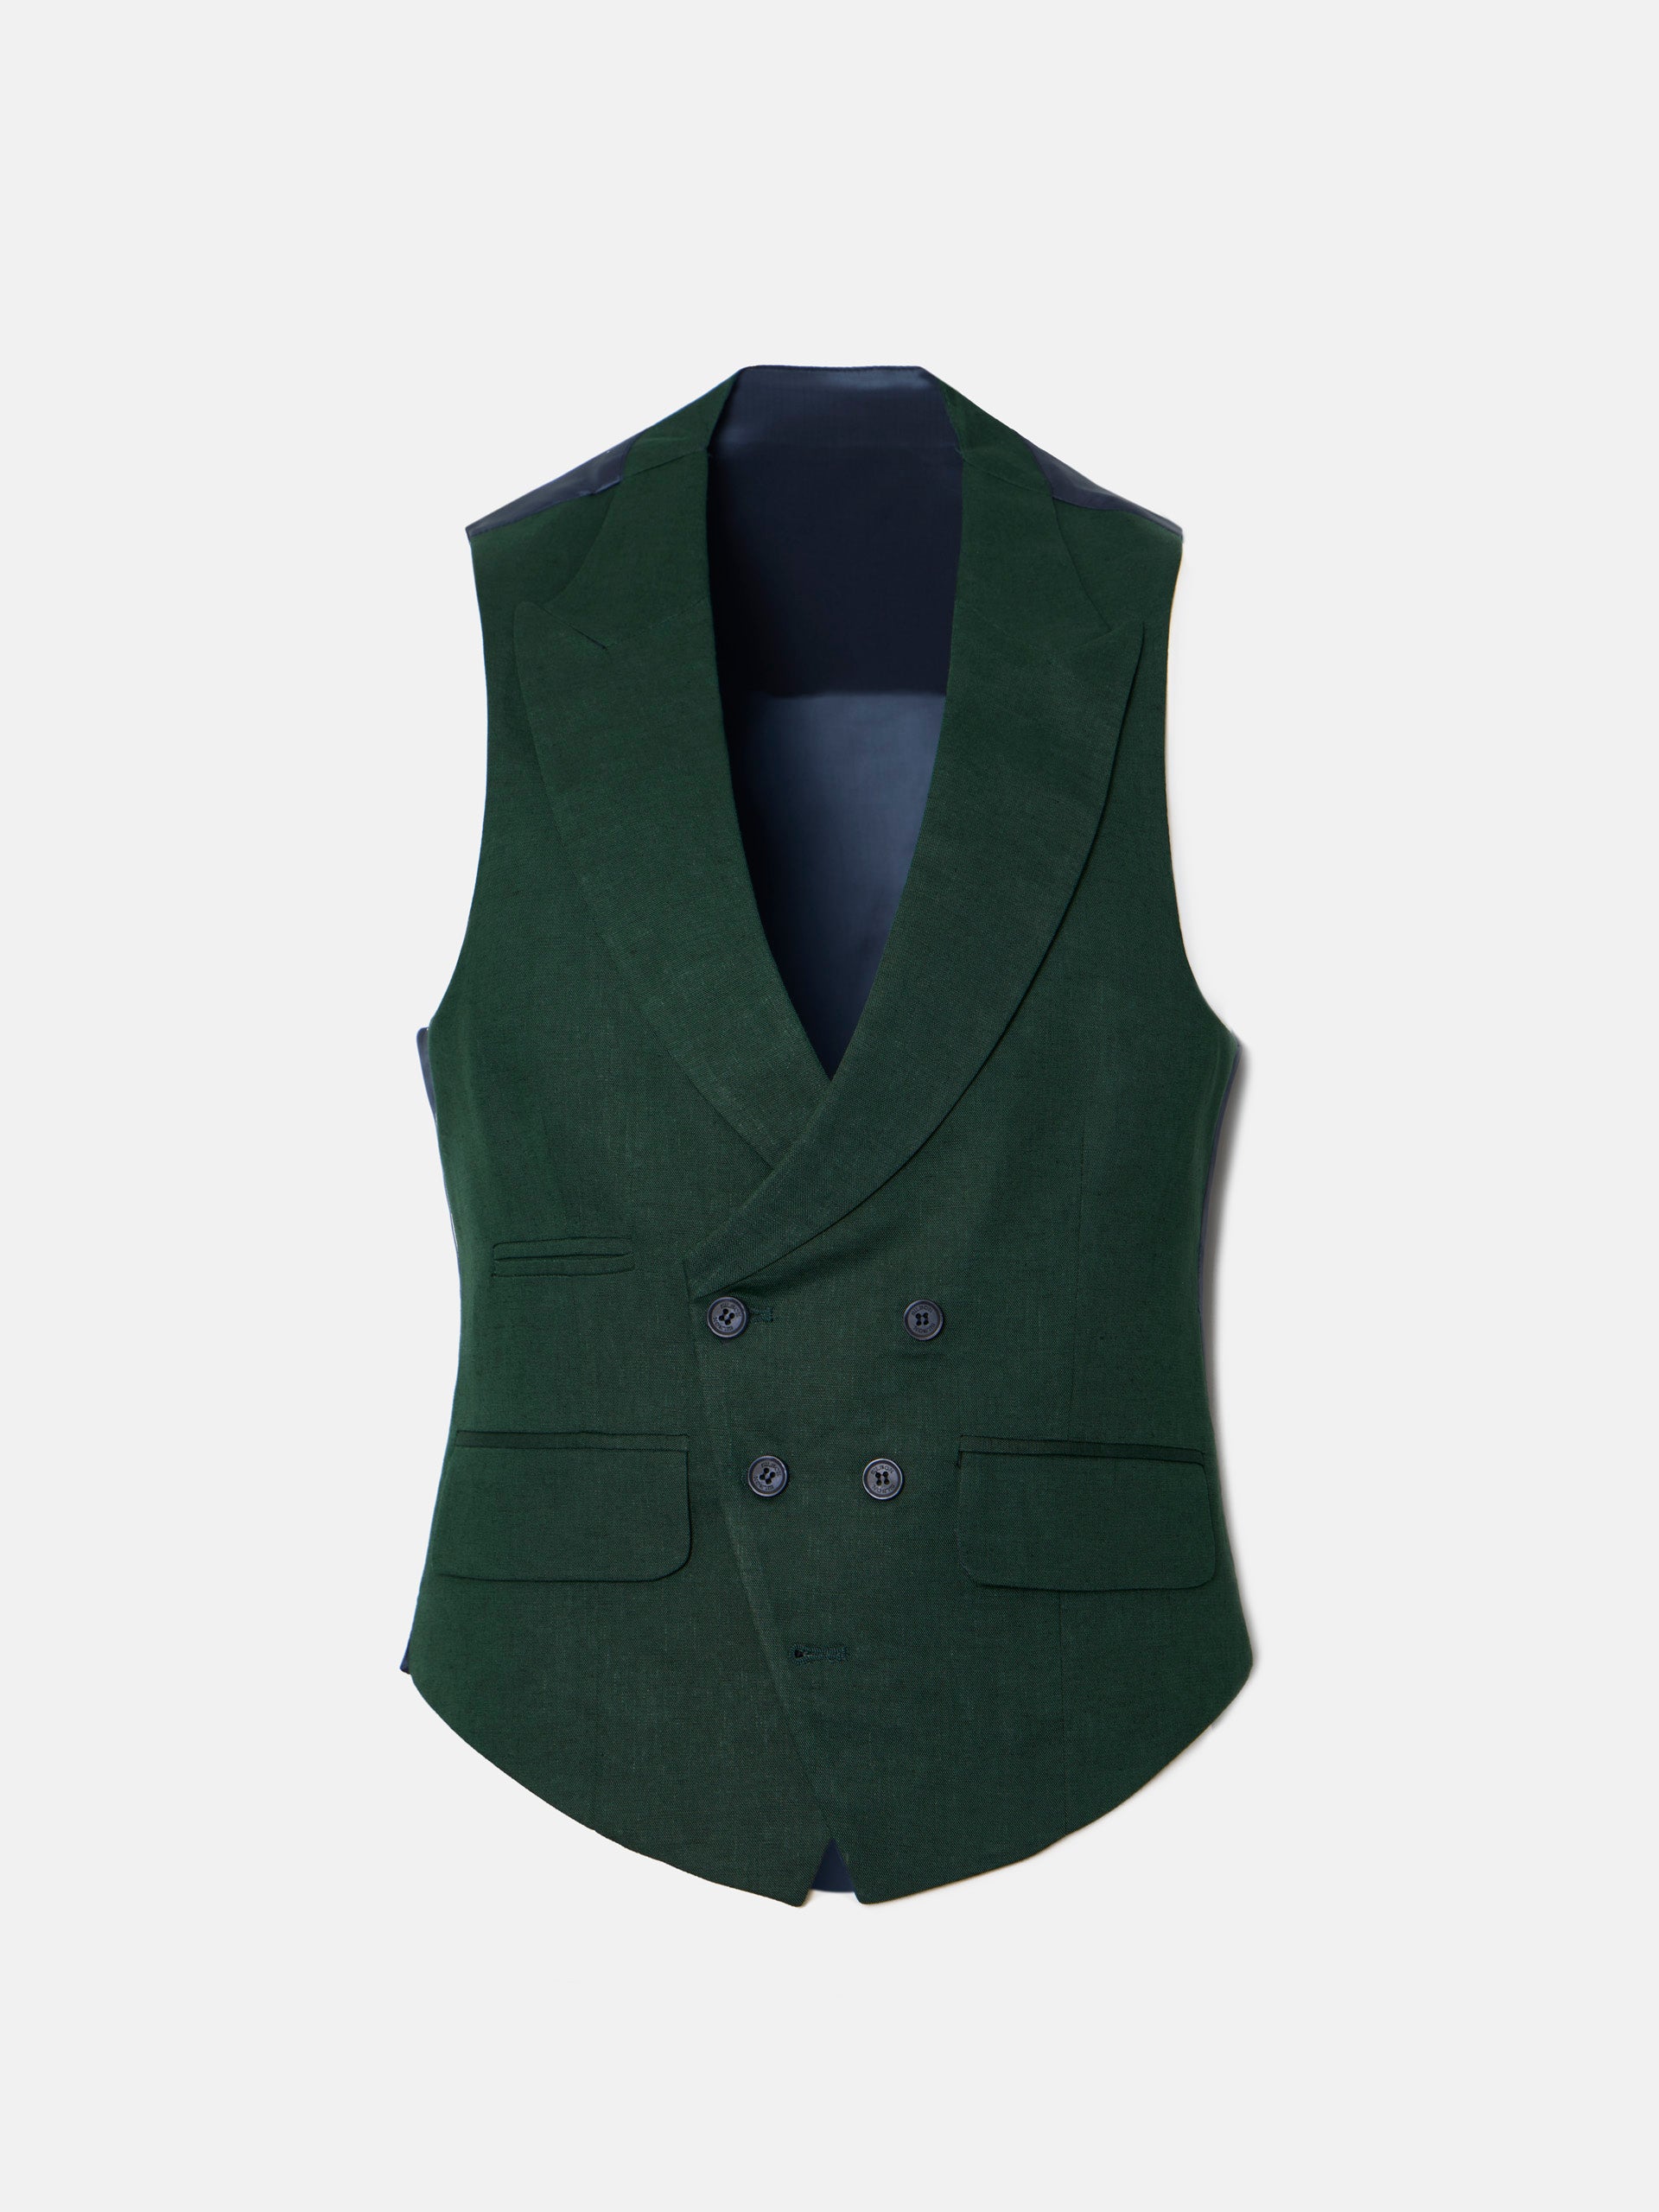 Chaleco chaque tailoring verde oscuro